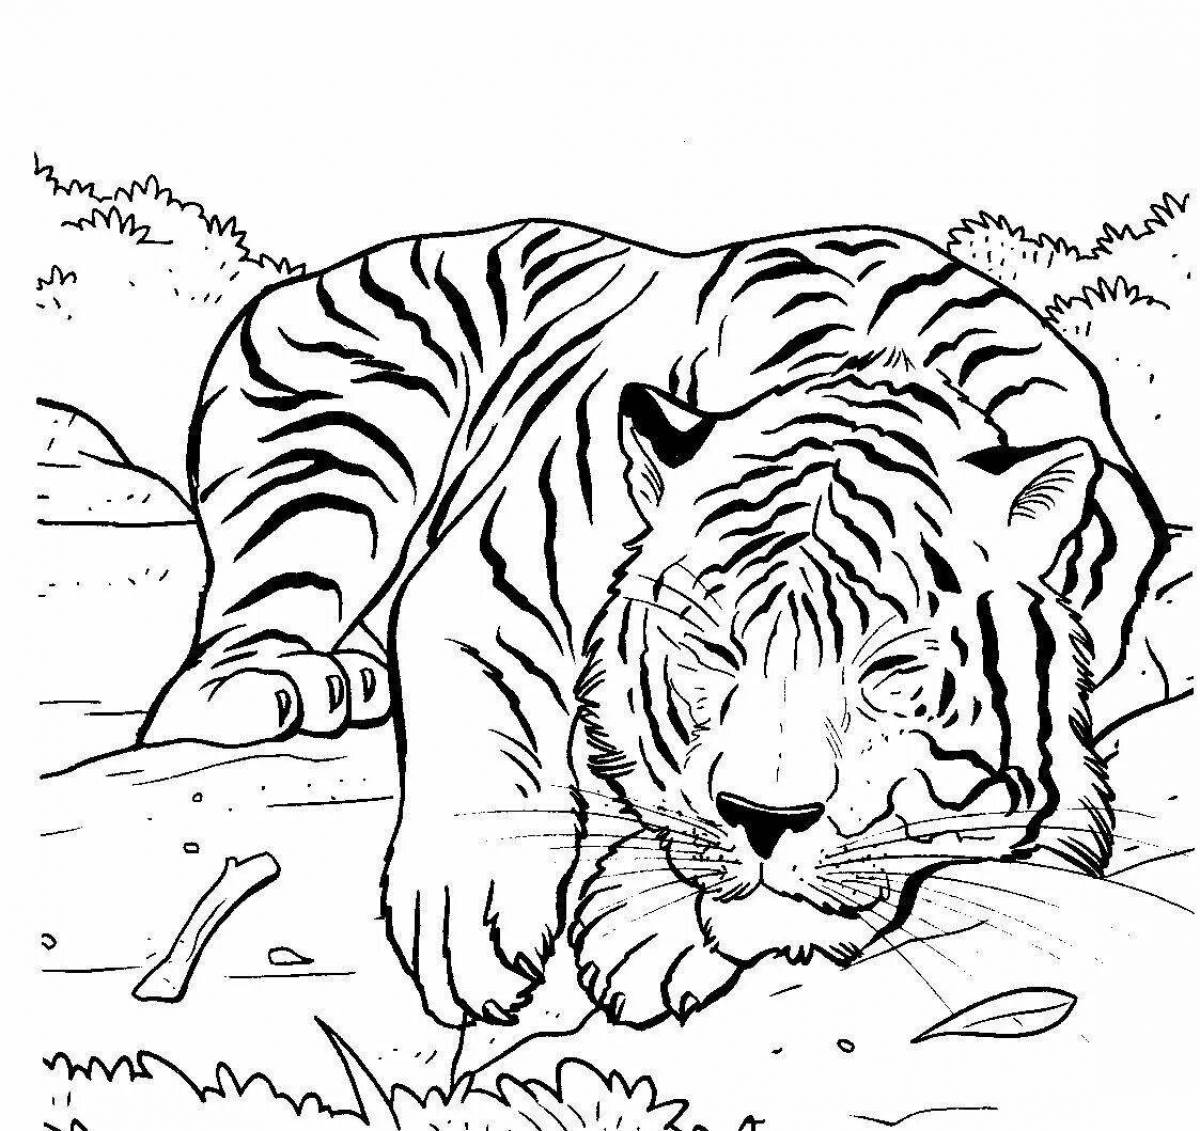 Impeccable red book siberian tiger coloring book